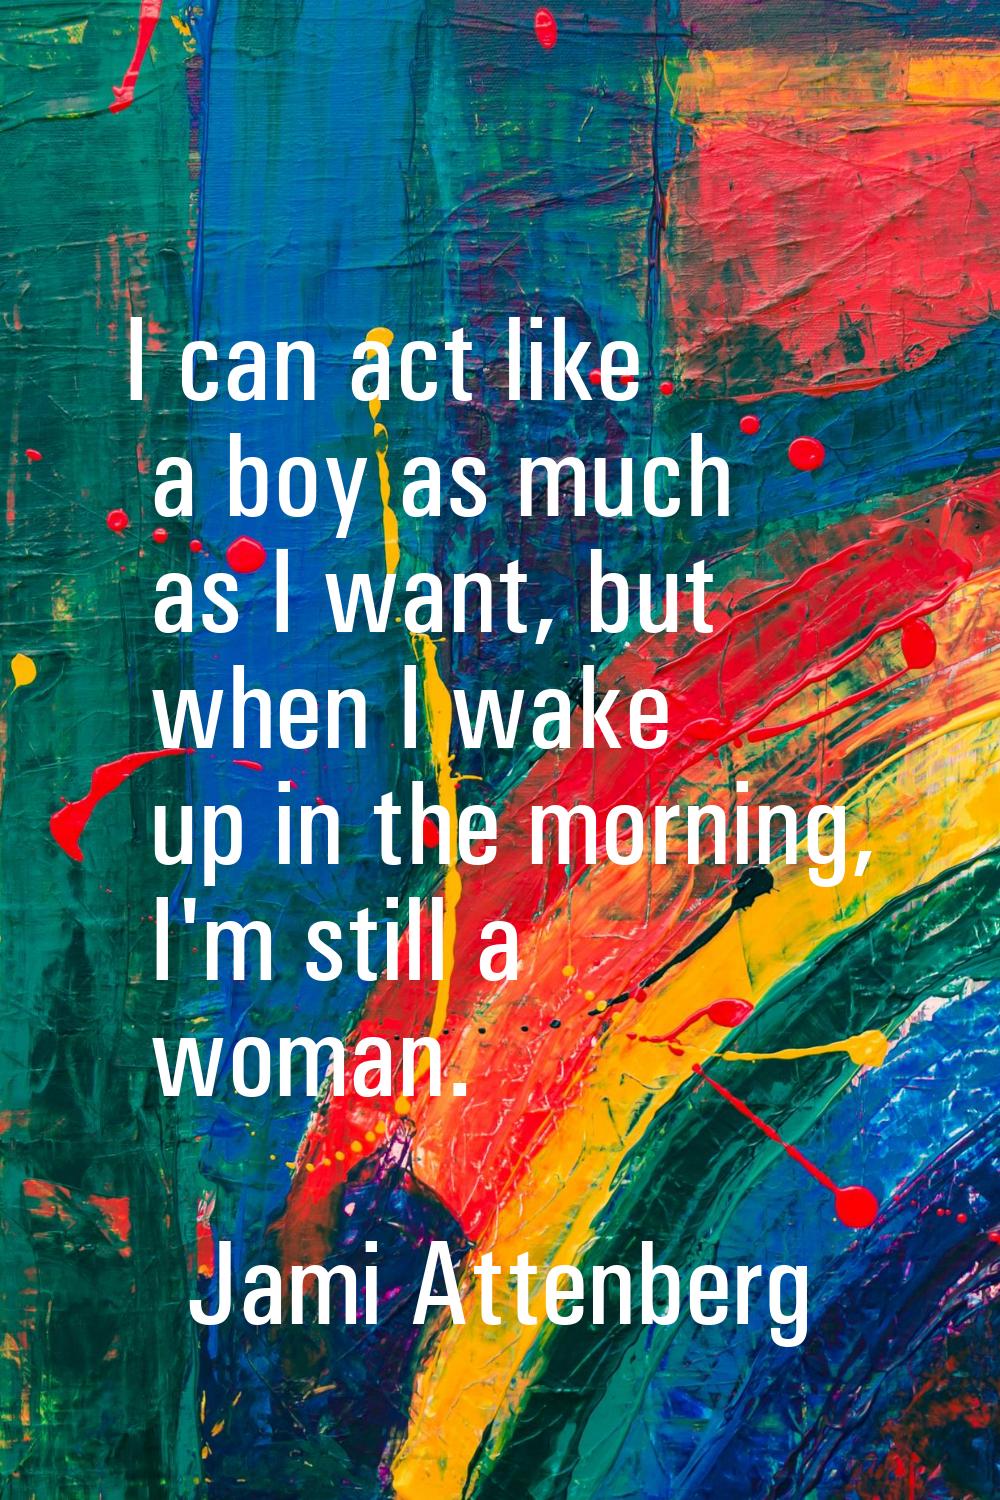 I can act like a boy as much as I want, but when I wake up in the morning, I'm still a woman.